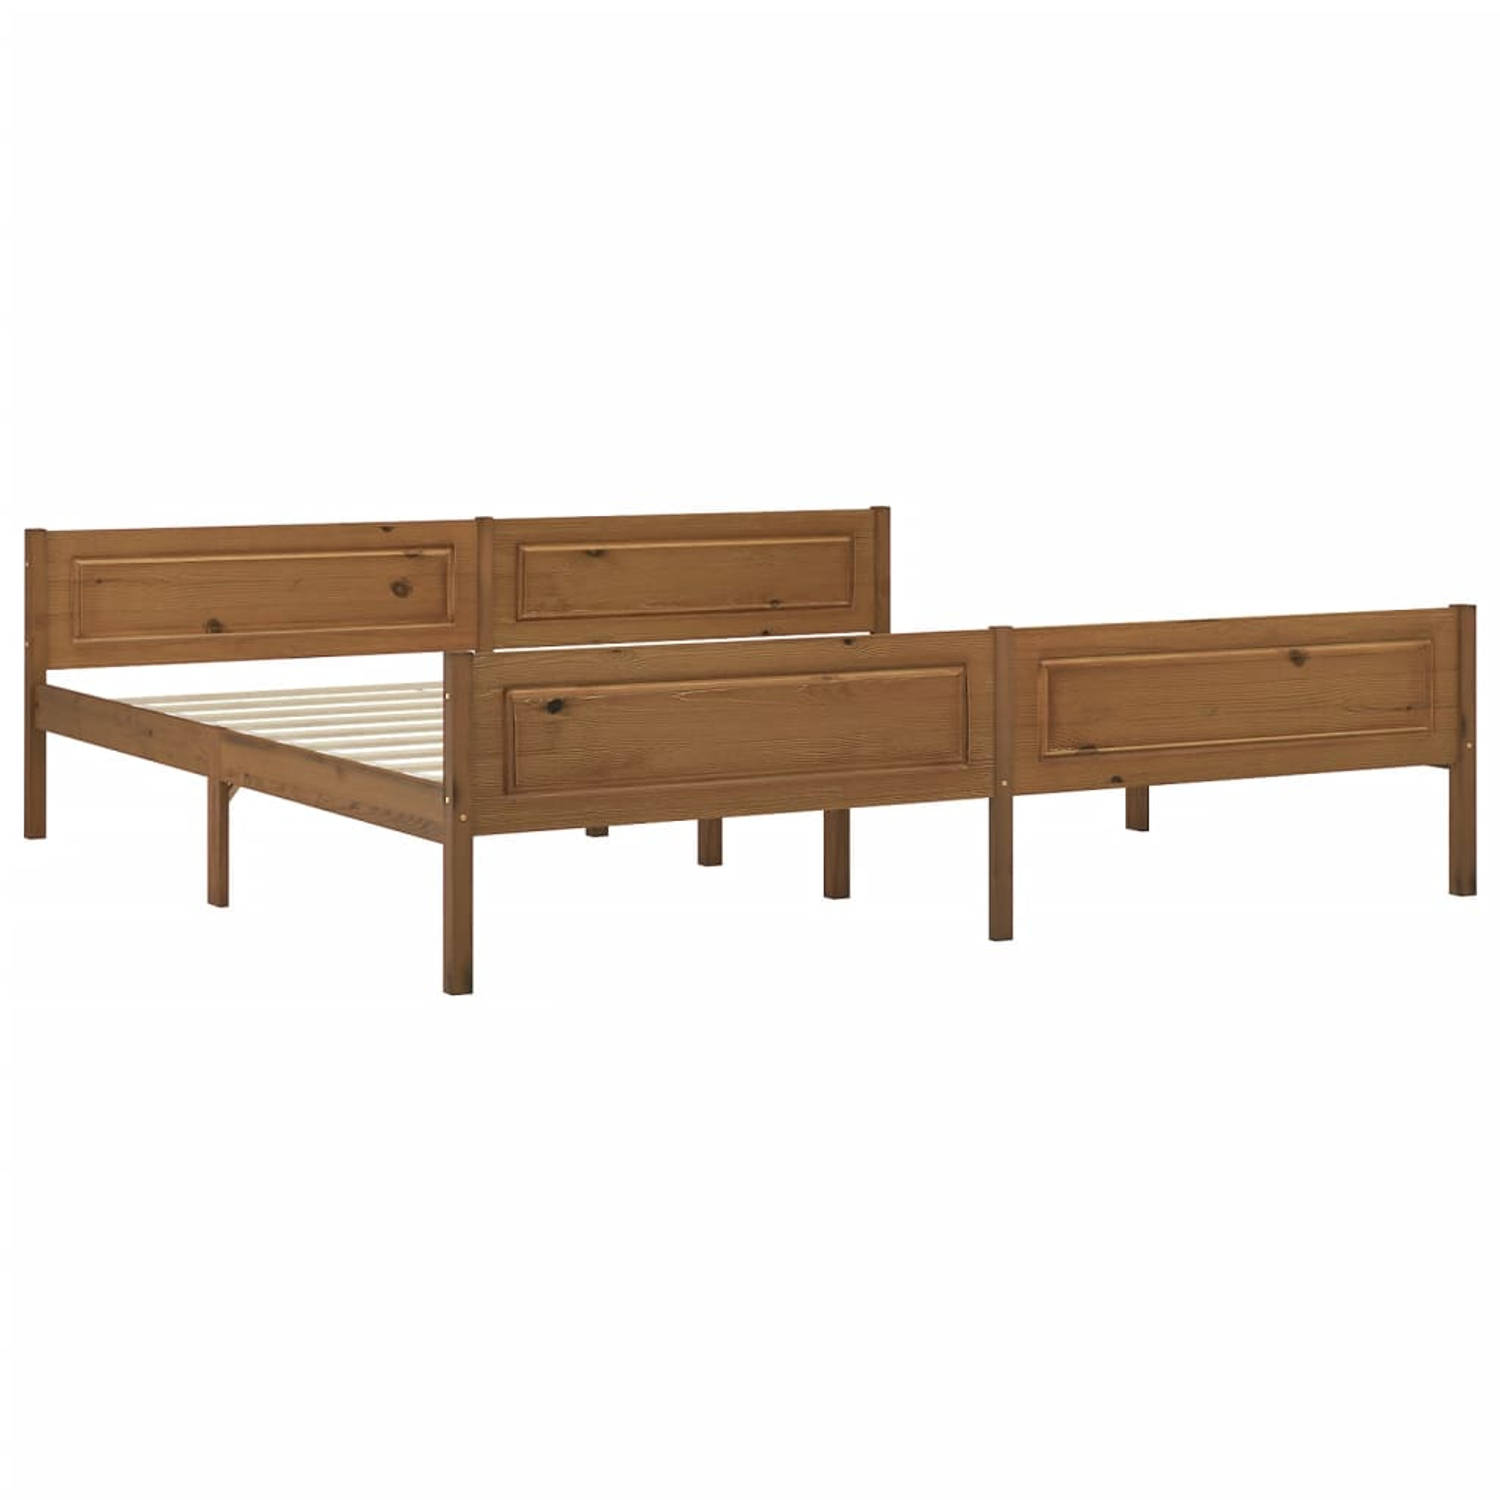 The Living Store Bedframe massief grenenhout honingbruin 200x200 cm - Bedframe - Bedframe - Bed Frame - Bed Frames - Bed - Bedden - 2-persoonsbed - 2-persoonsbedden - Tweepersoons